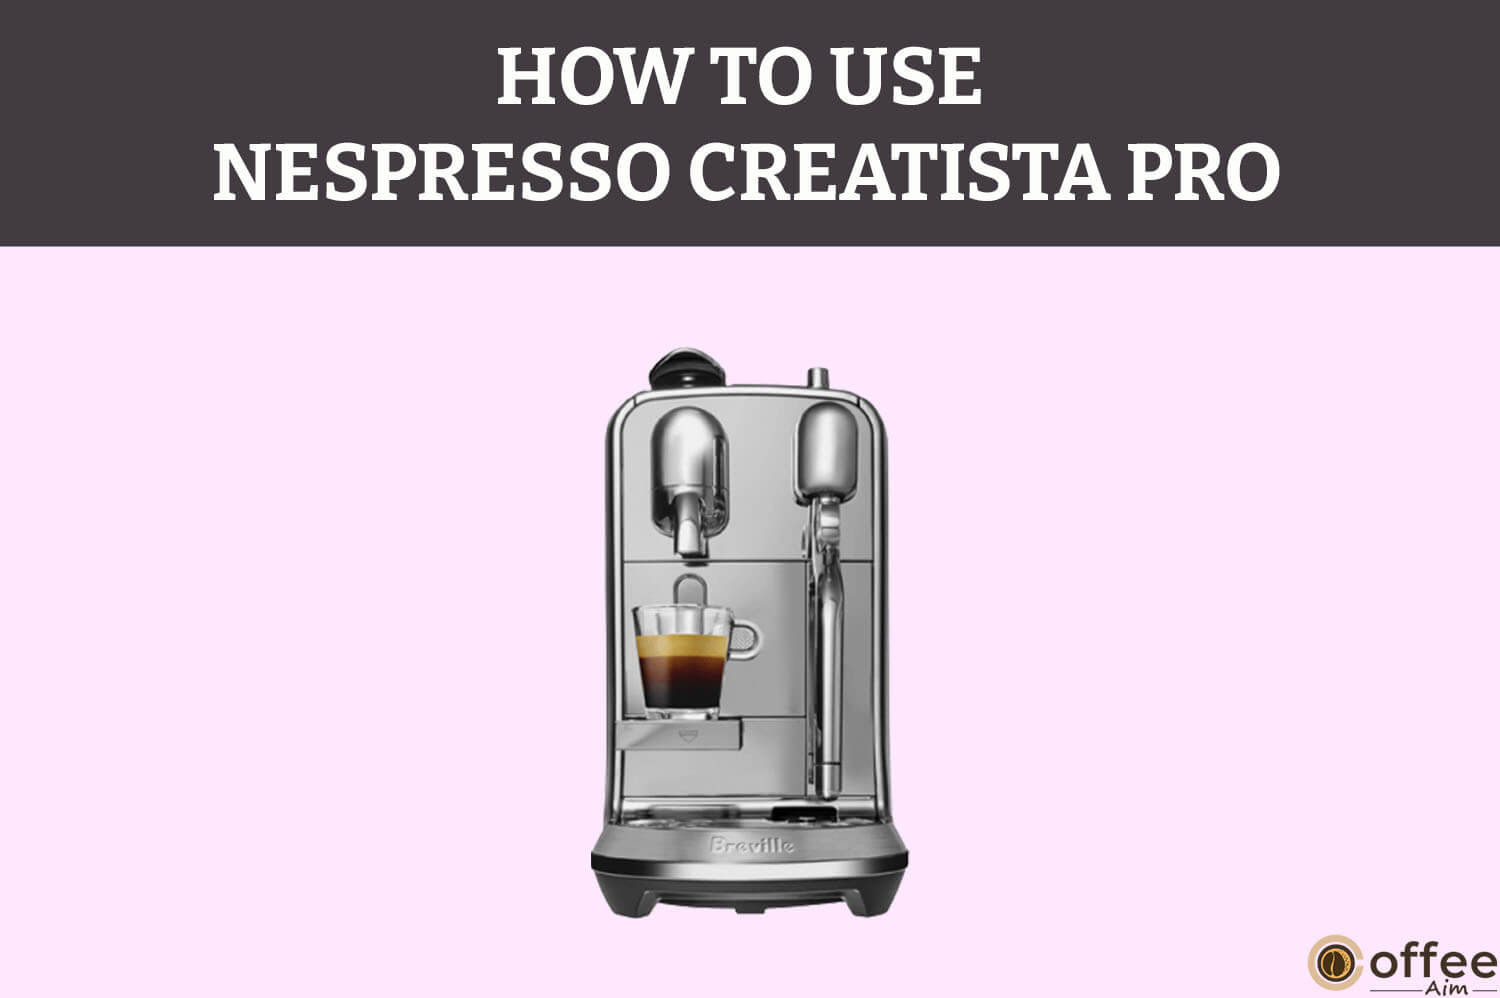 Featured image for the article "How To Use Nespresso Creatista Pro"